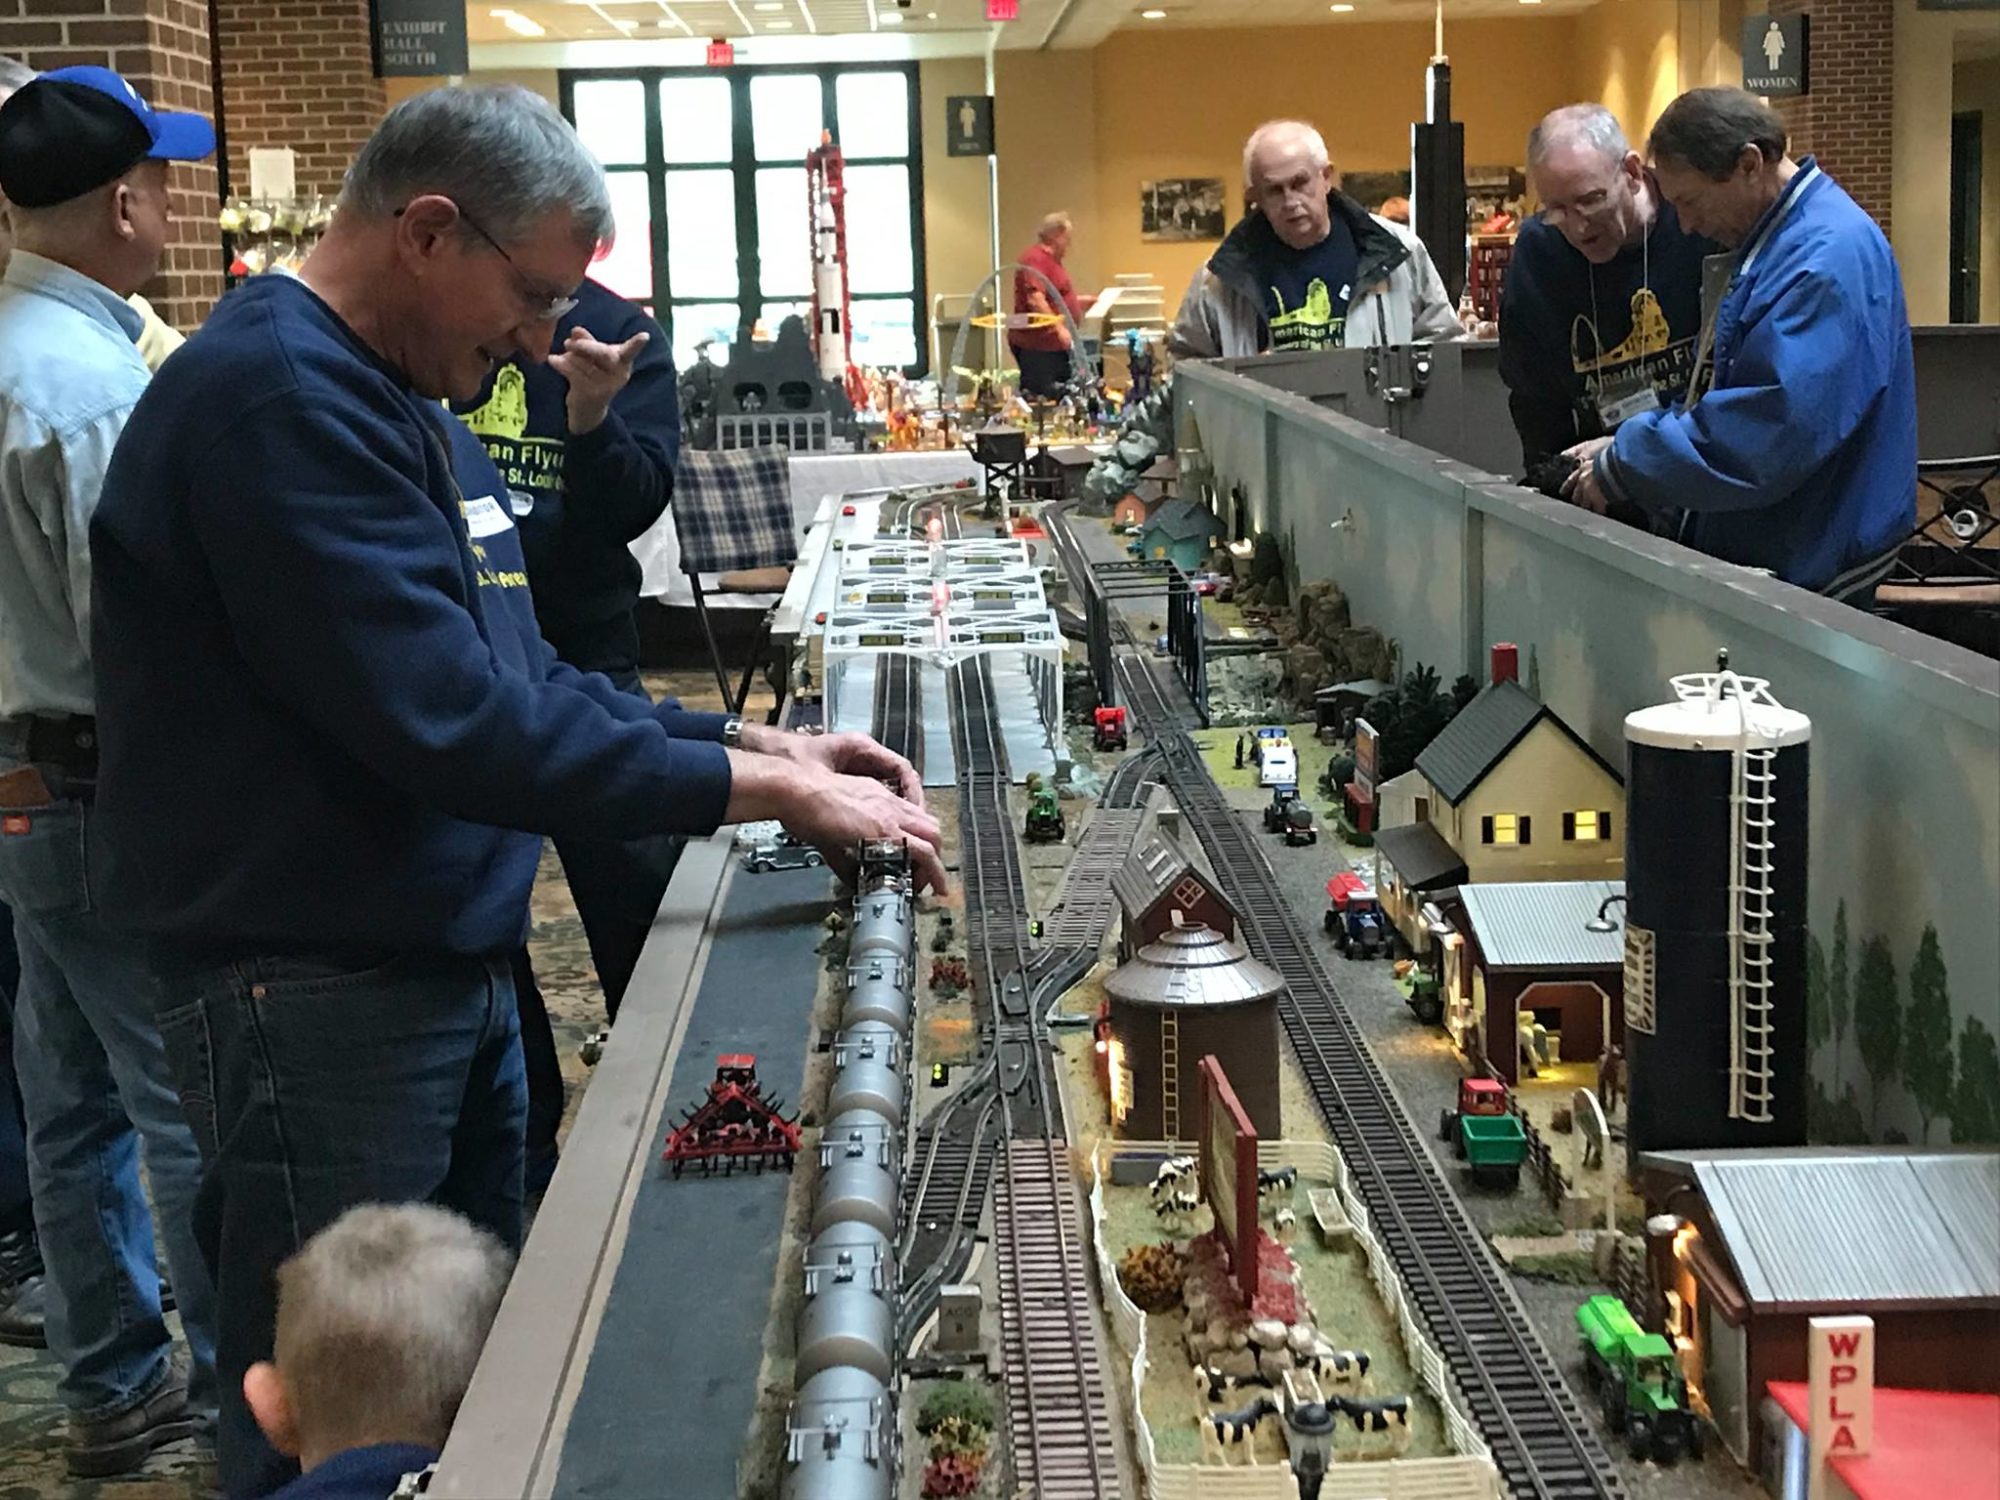 The Great Train Show